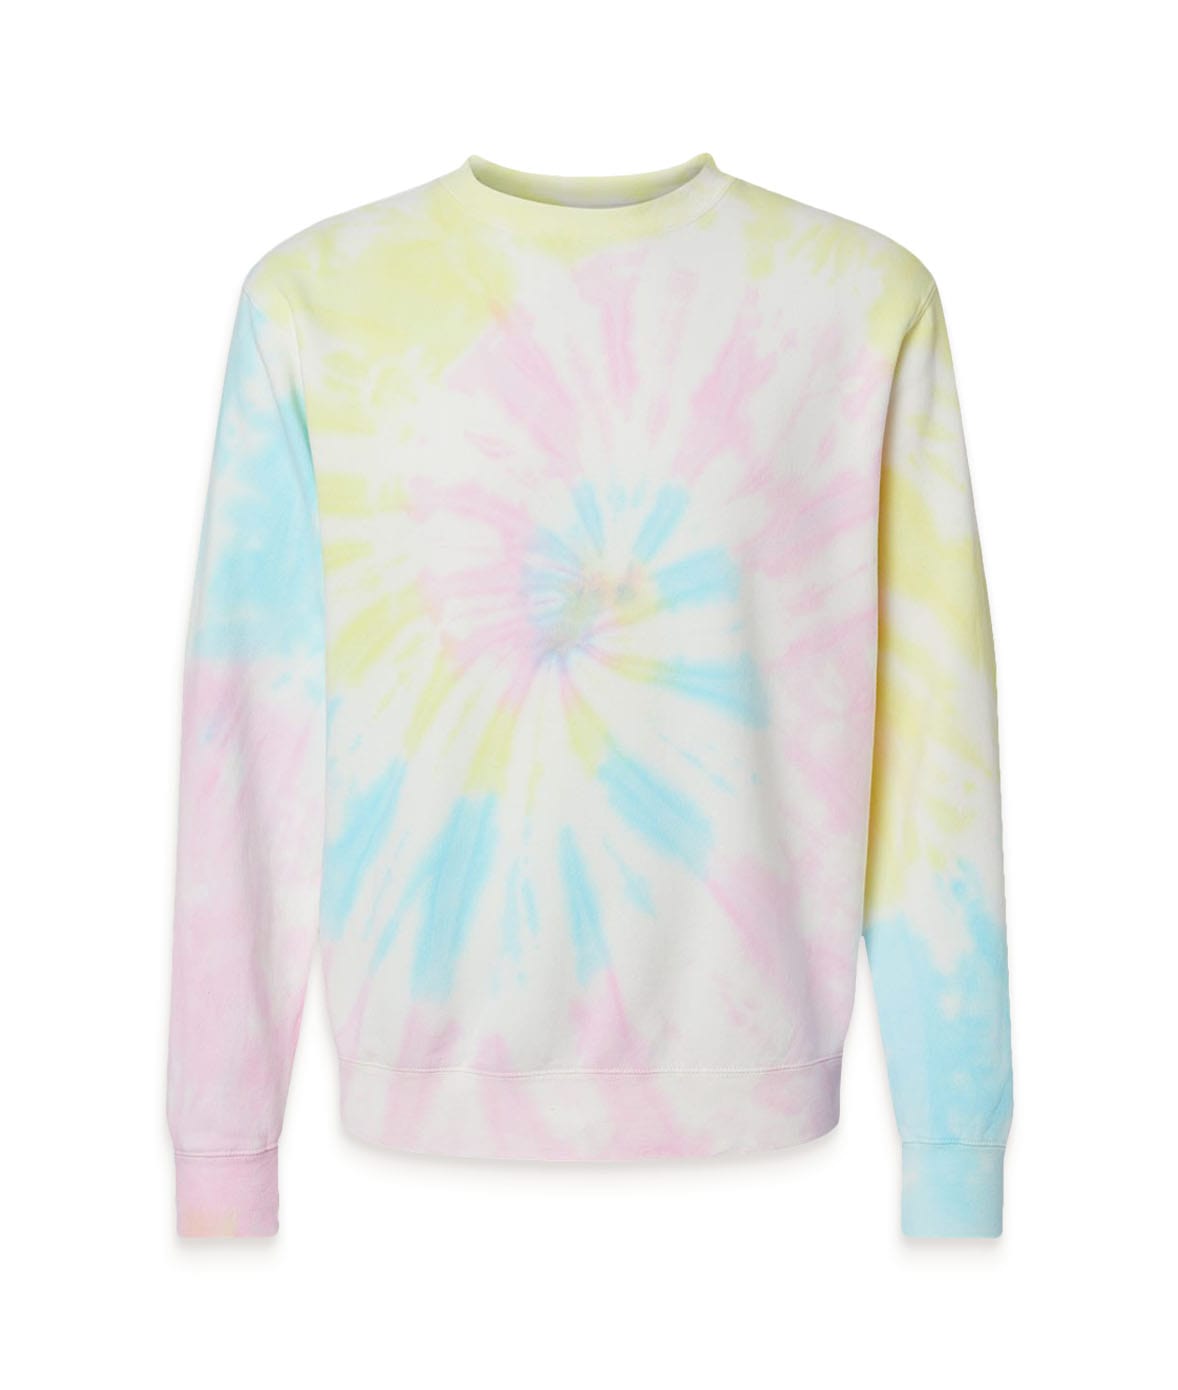 Shop Nayked Apparel Men's Ridiculously Soft Tie-Dyed Pullover 